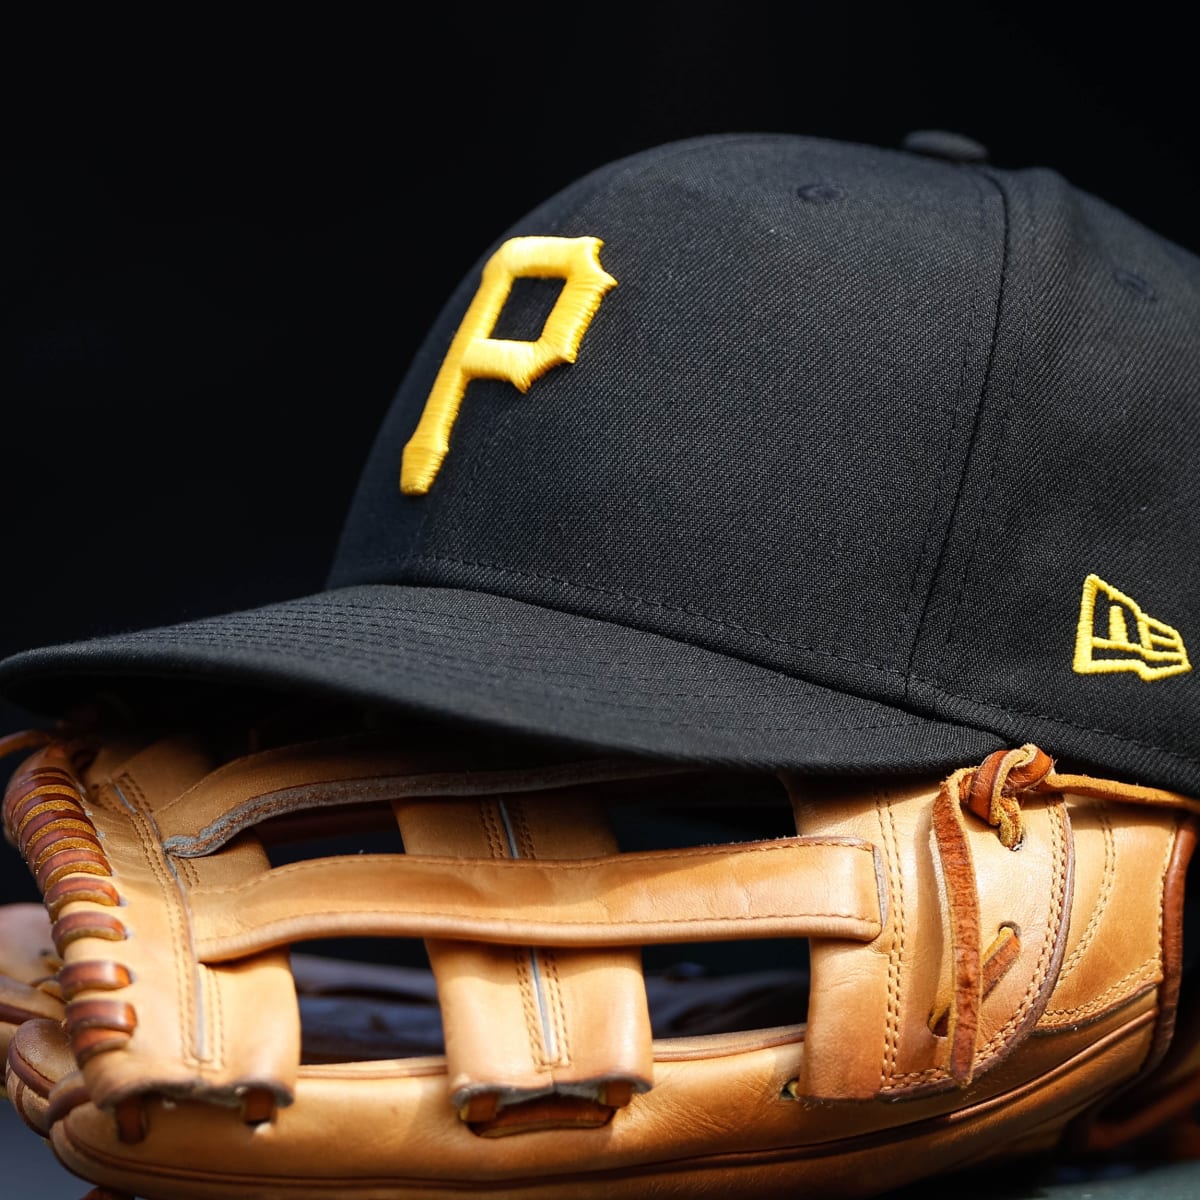 Pirates call up 33-year-old Drew Maggi to major league roster